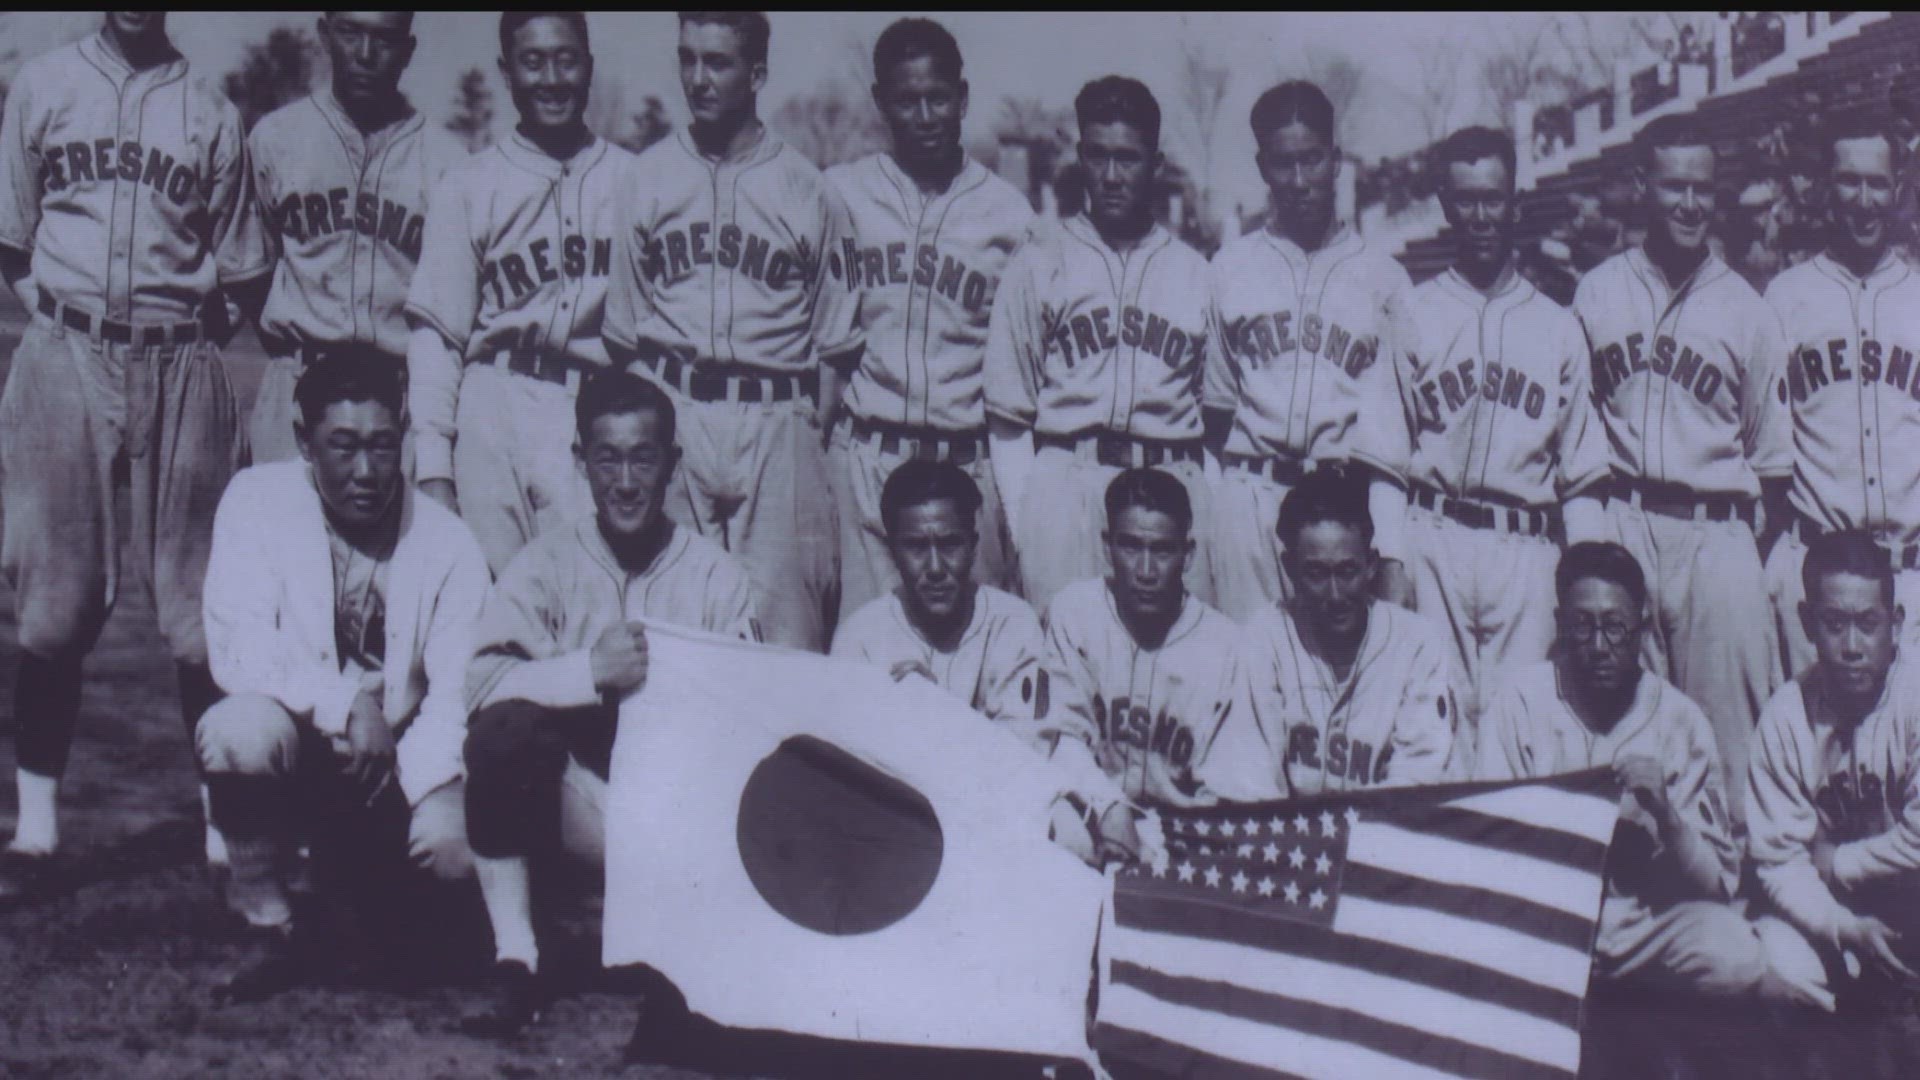 MLB celebrates the legacy of Japanese American baseball with new